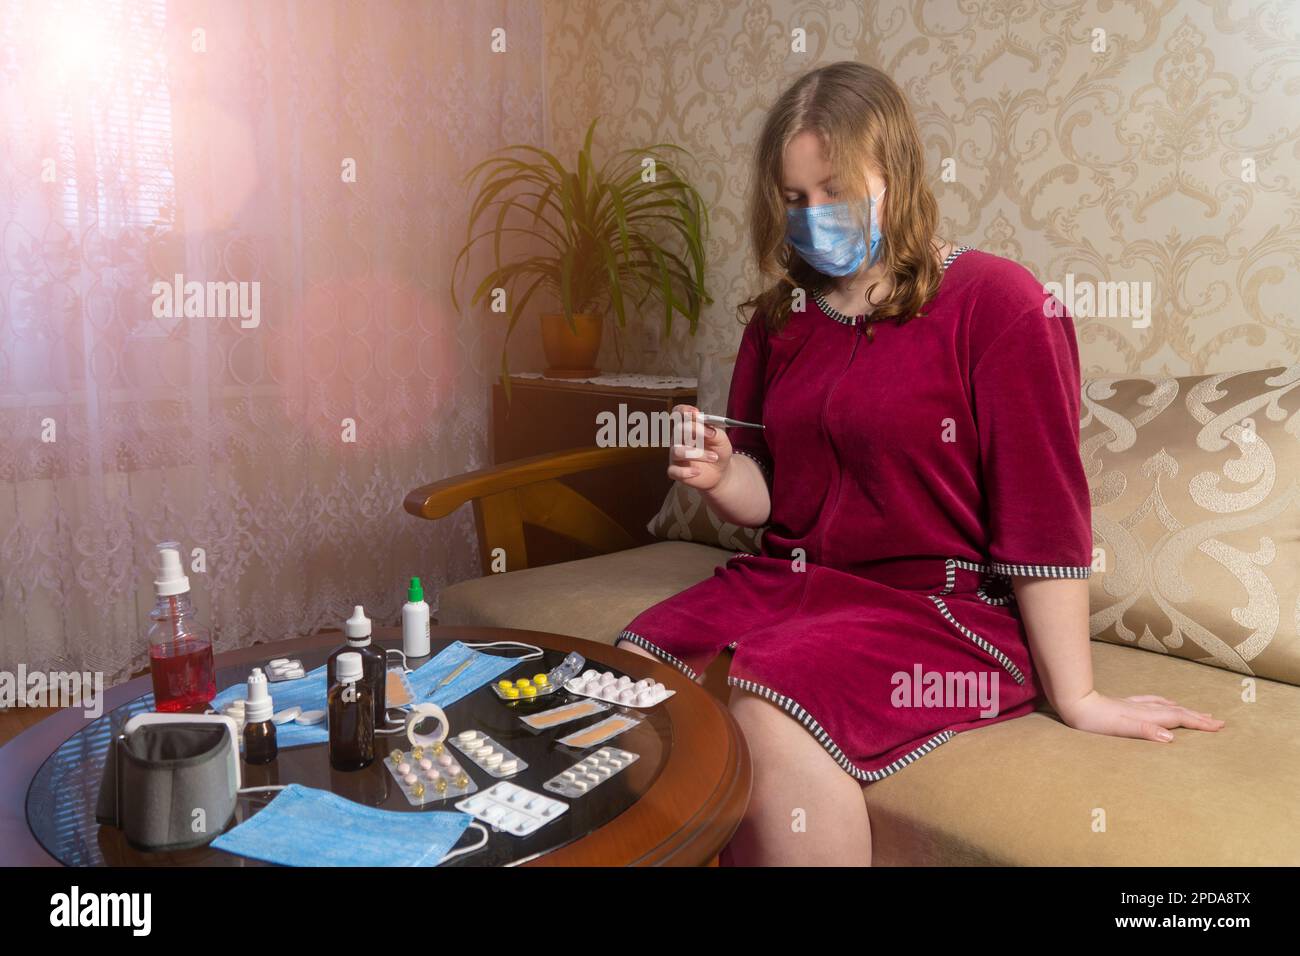 Girl in the room sits on the couch and checks her temperature on a thermometer. The concept of medicine, pharmacy, healthcare and treatment at home Stock Photo